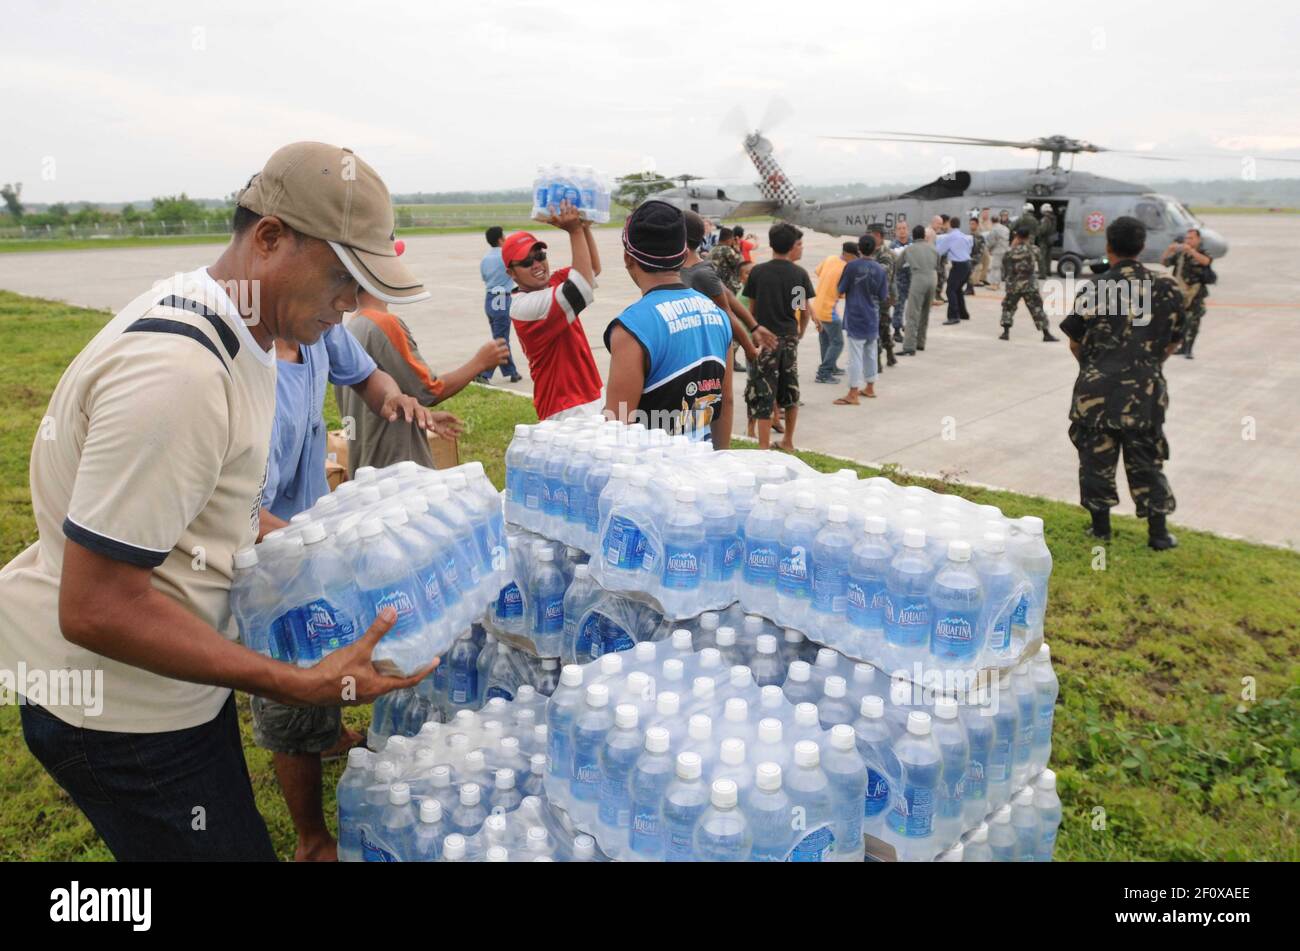 26 June 2008 - Philippines - Residents of Iloilo help U.S. service members unload bottled water and rice from a helicopter assigned to the Ã’Black KnightsÃ“ of Helicopter Anti-Submarine Squadron (HS) 4 on a flight line in Iloilo. The Ronald Reagan Carrier Strike Group is providing humanitarian assistance and disaster relief to victims of Typhoon Fengshen, which struck the Philippines June 23, 2008. Photo Credit: Spike Call/U.S. Navy/Sipa Press/0806271620 Stock Photo